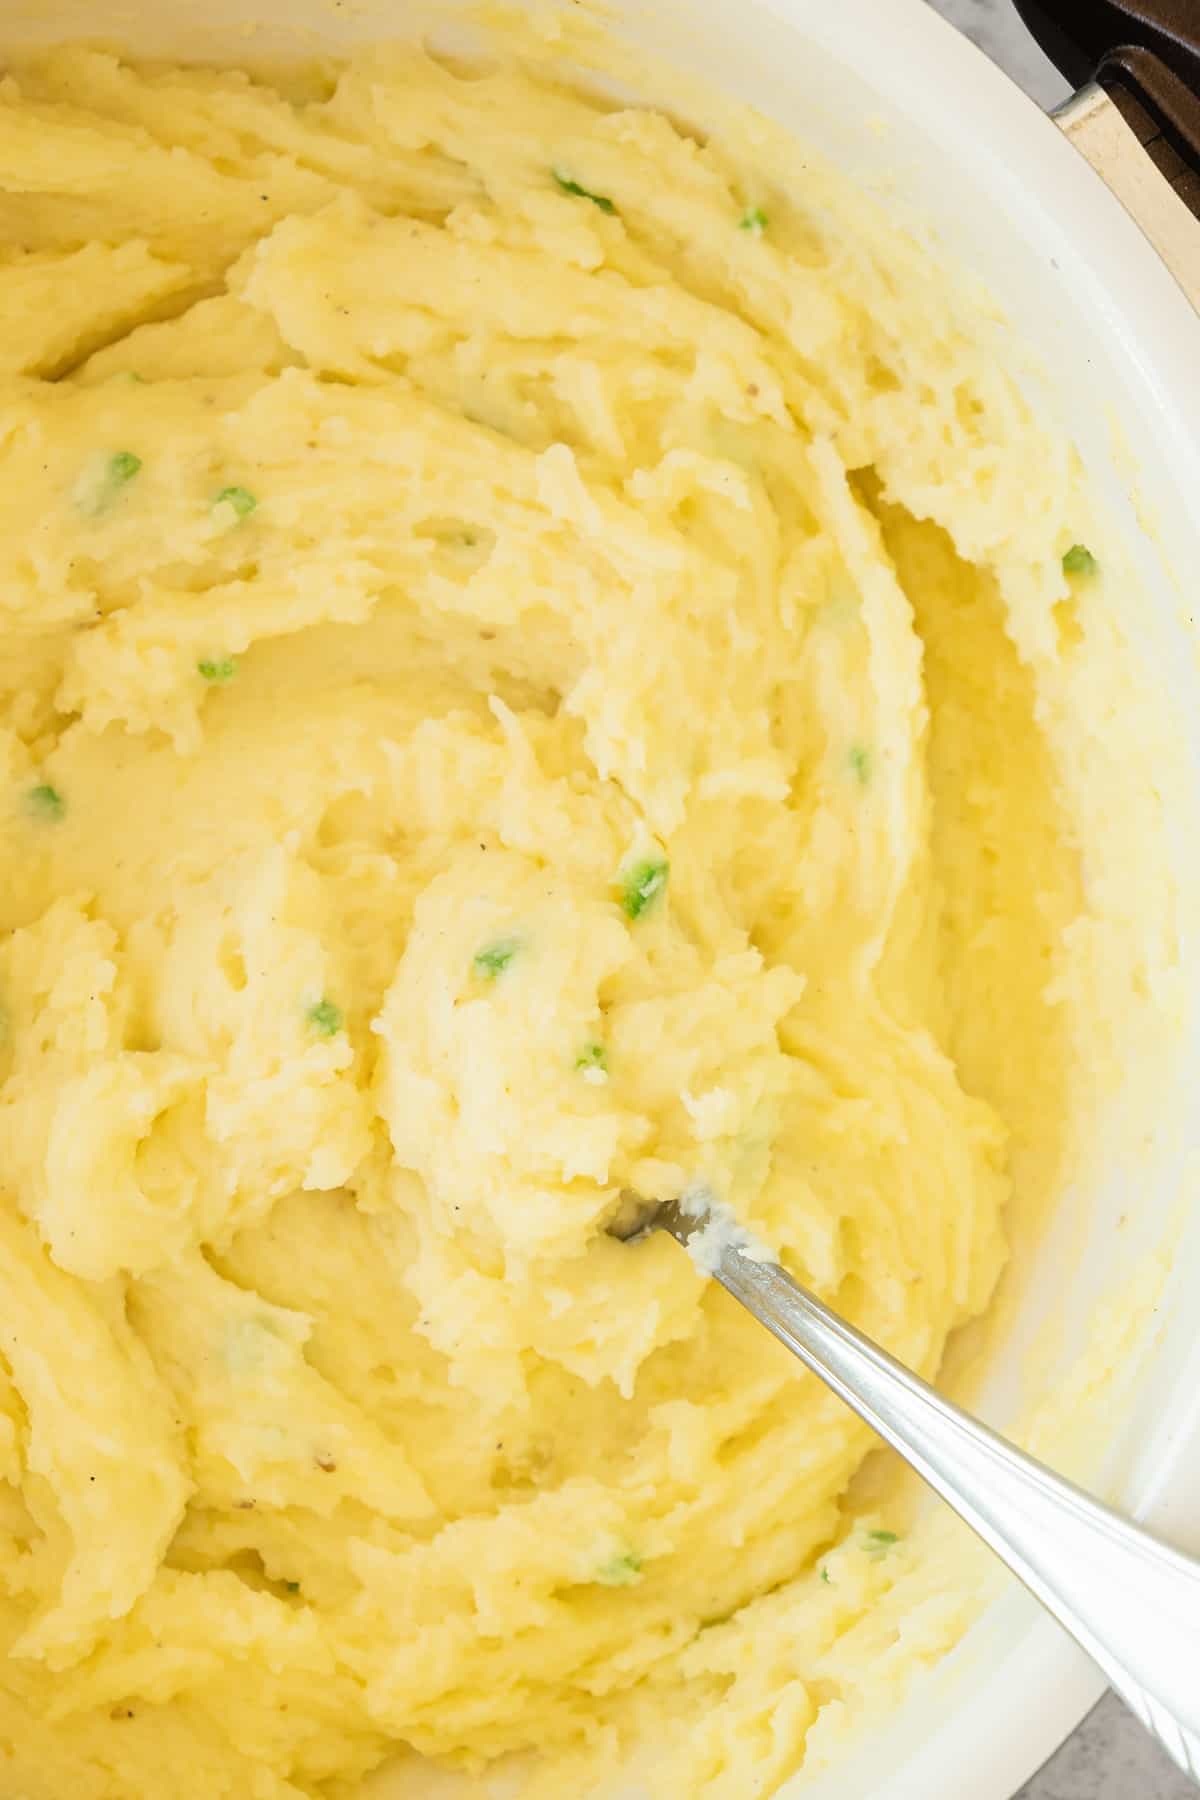 Mixing creamy mashed potatoes in a bowl.